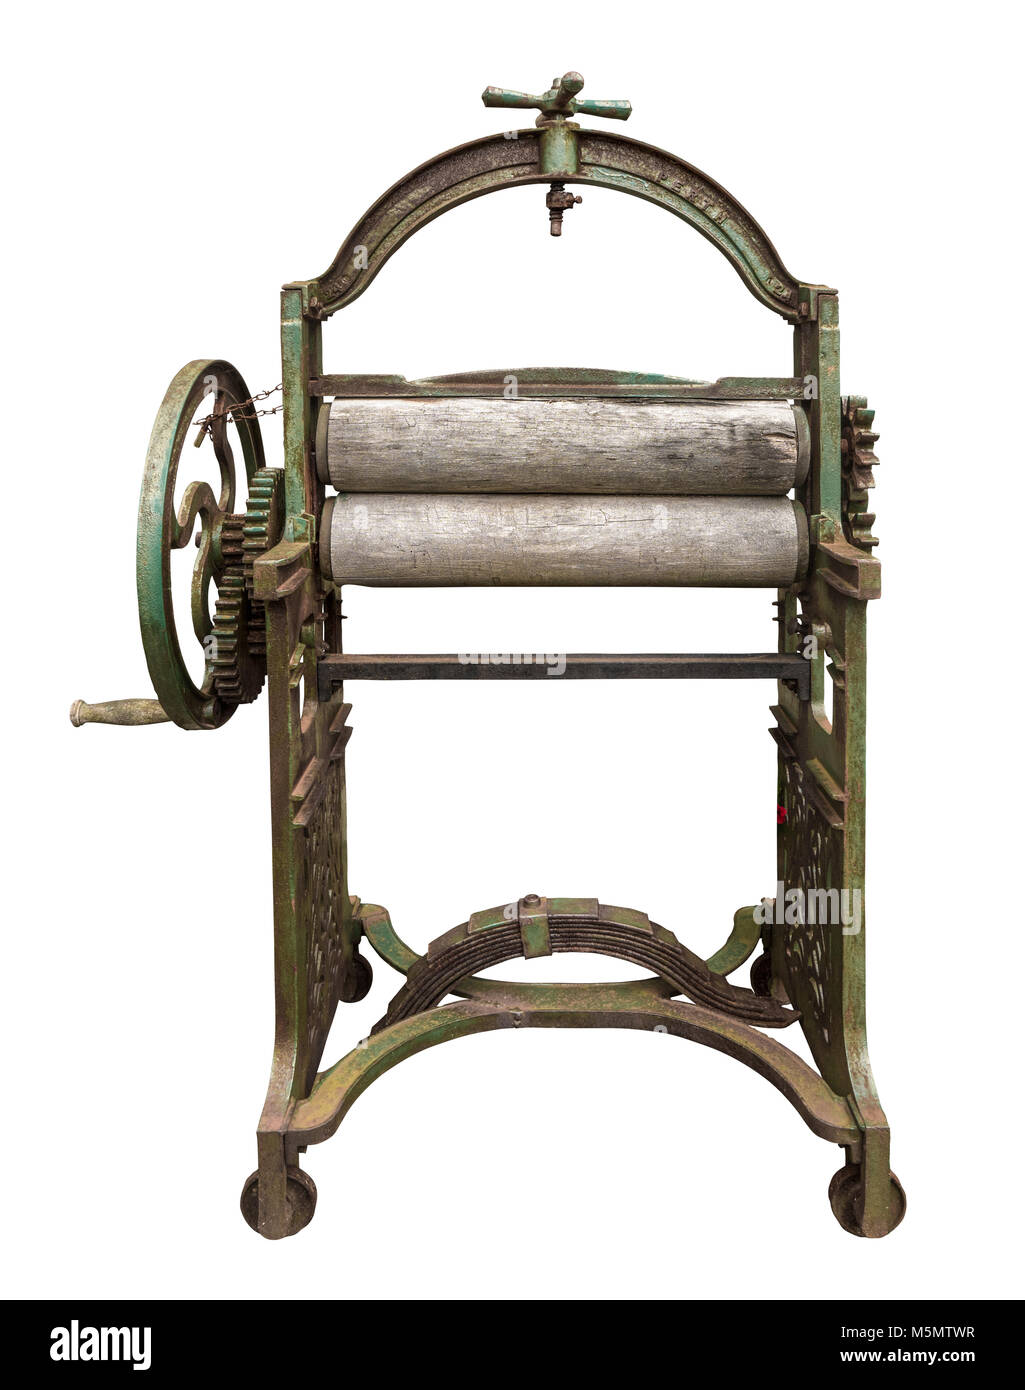 Isolated Vintage Laundry Mangle (Press) With Clipping Path On White Background Stock Photo